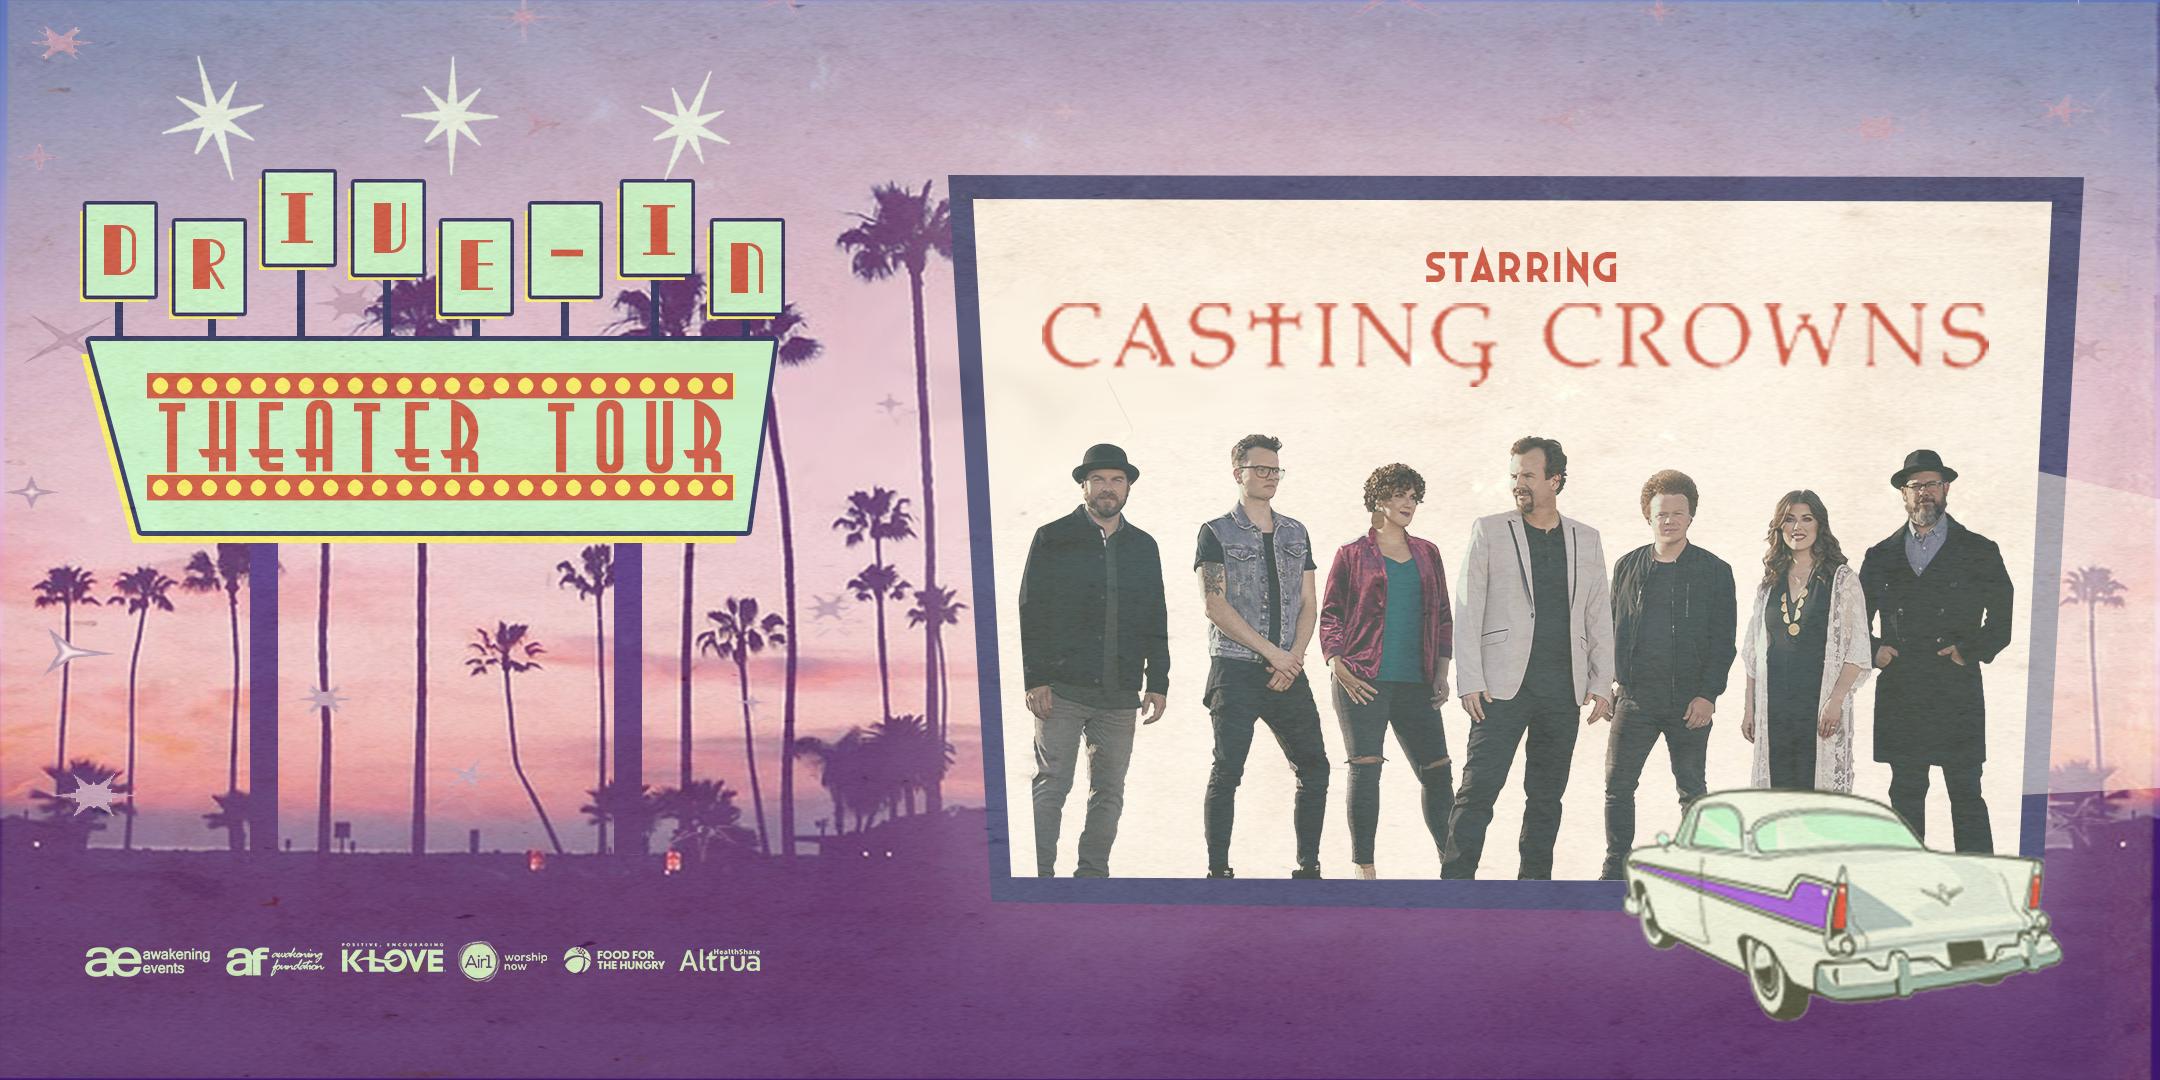 CASTING CROWNS: The Drive-In Theater Tour - Gates Open at 7:30 PM